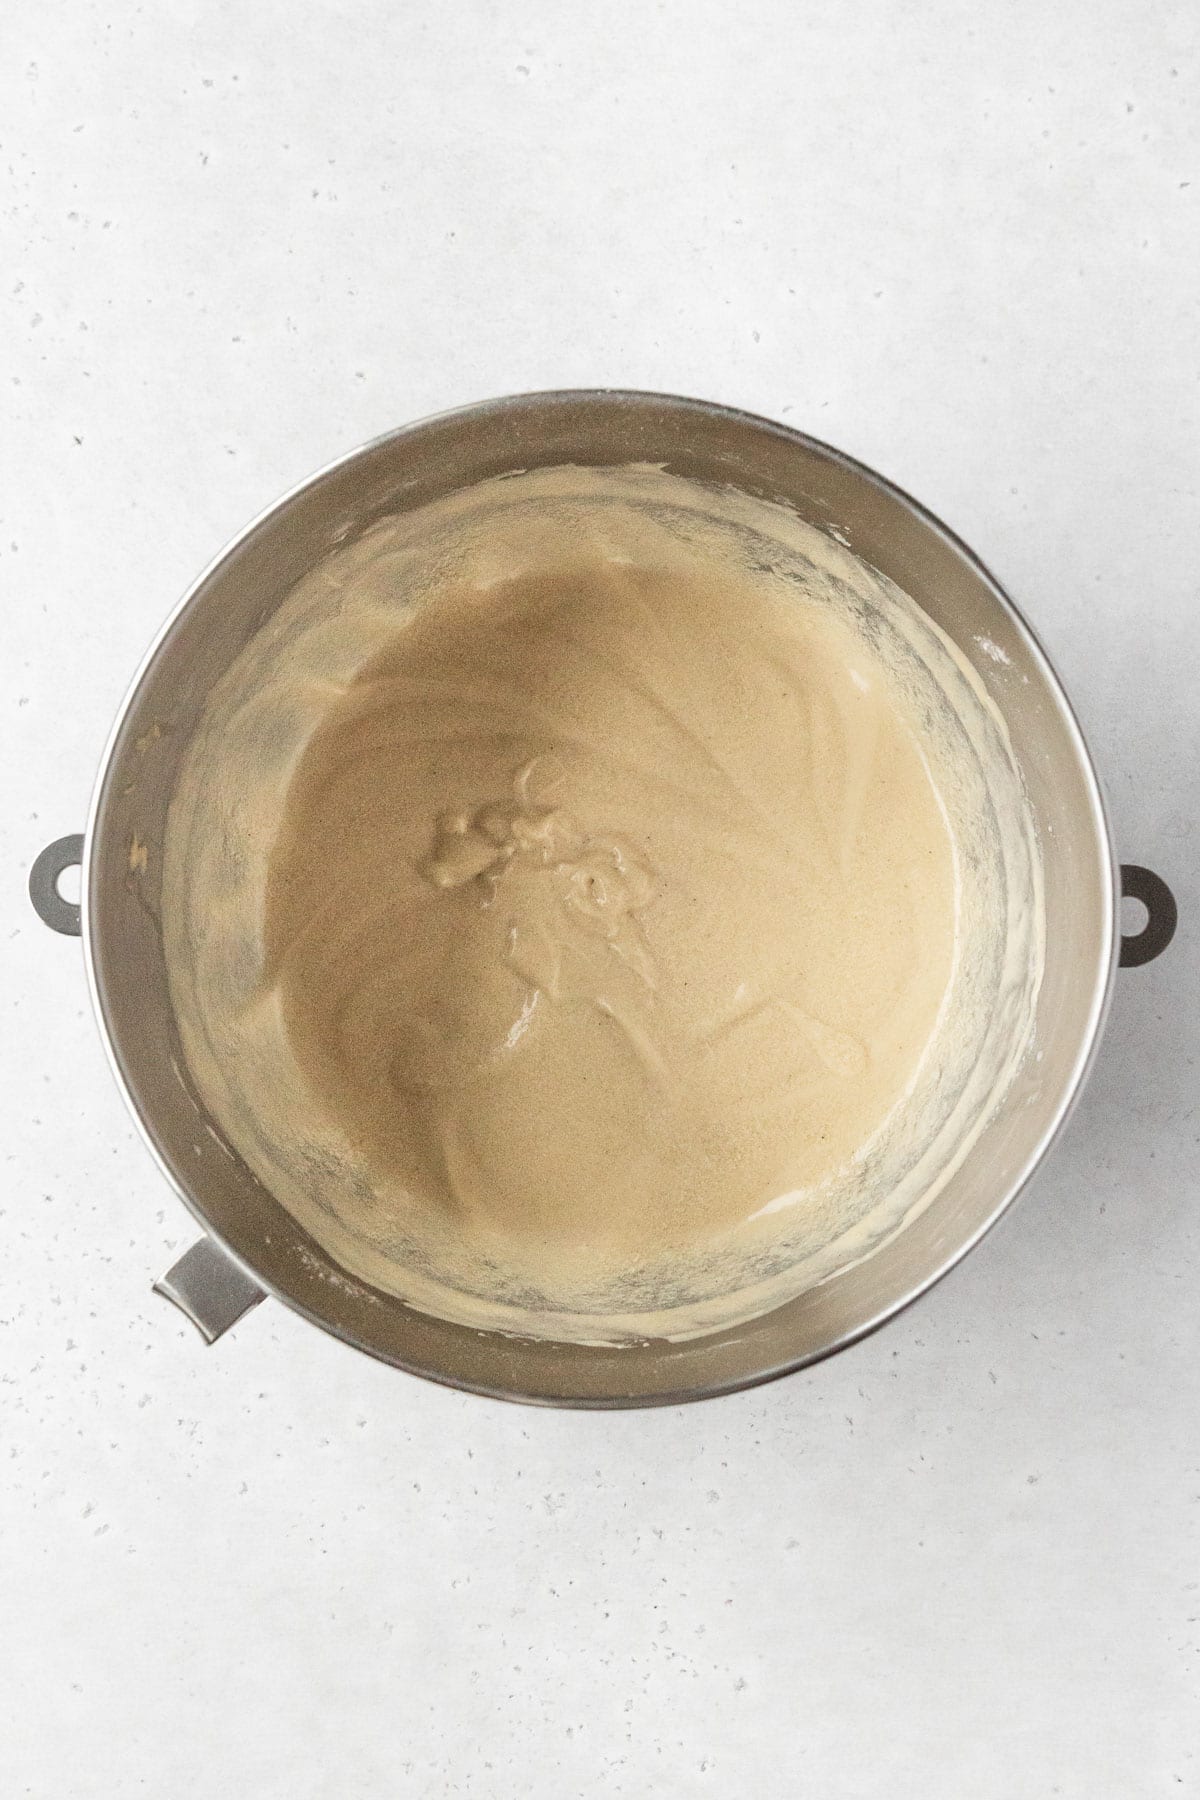 Gluten-free coffee cake batter is much thinner and smoother after the addition of milk.